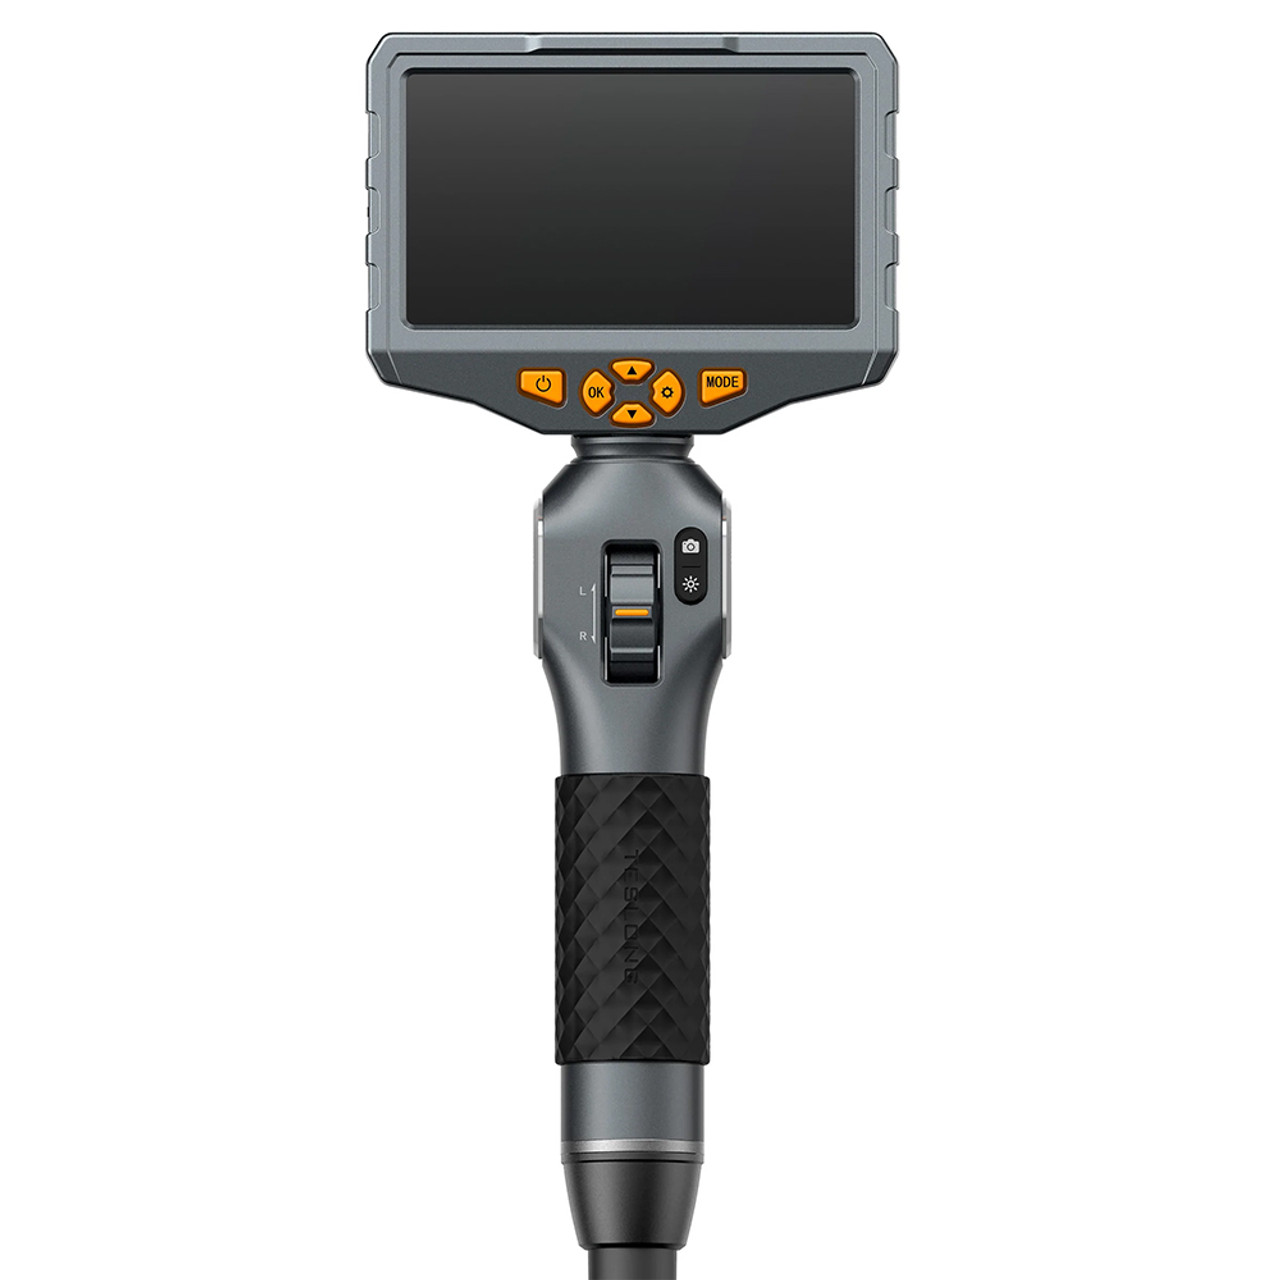 Teslong TD500 Articulating Endoscope Inspection Camera with 5-Inch